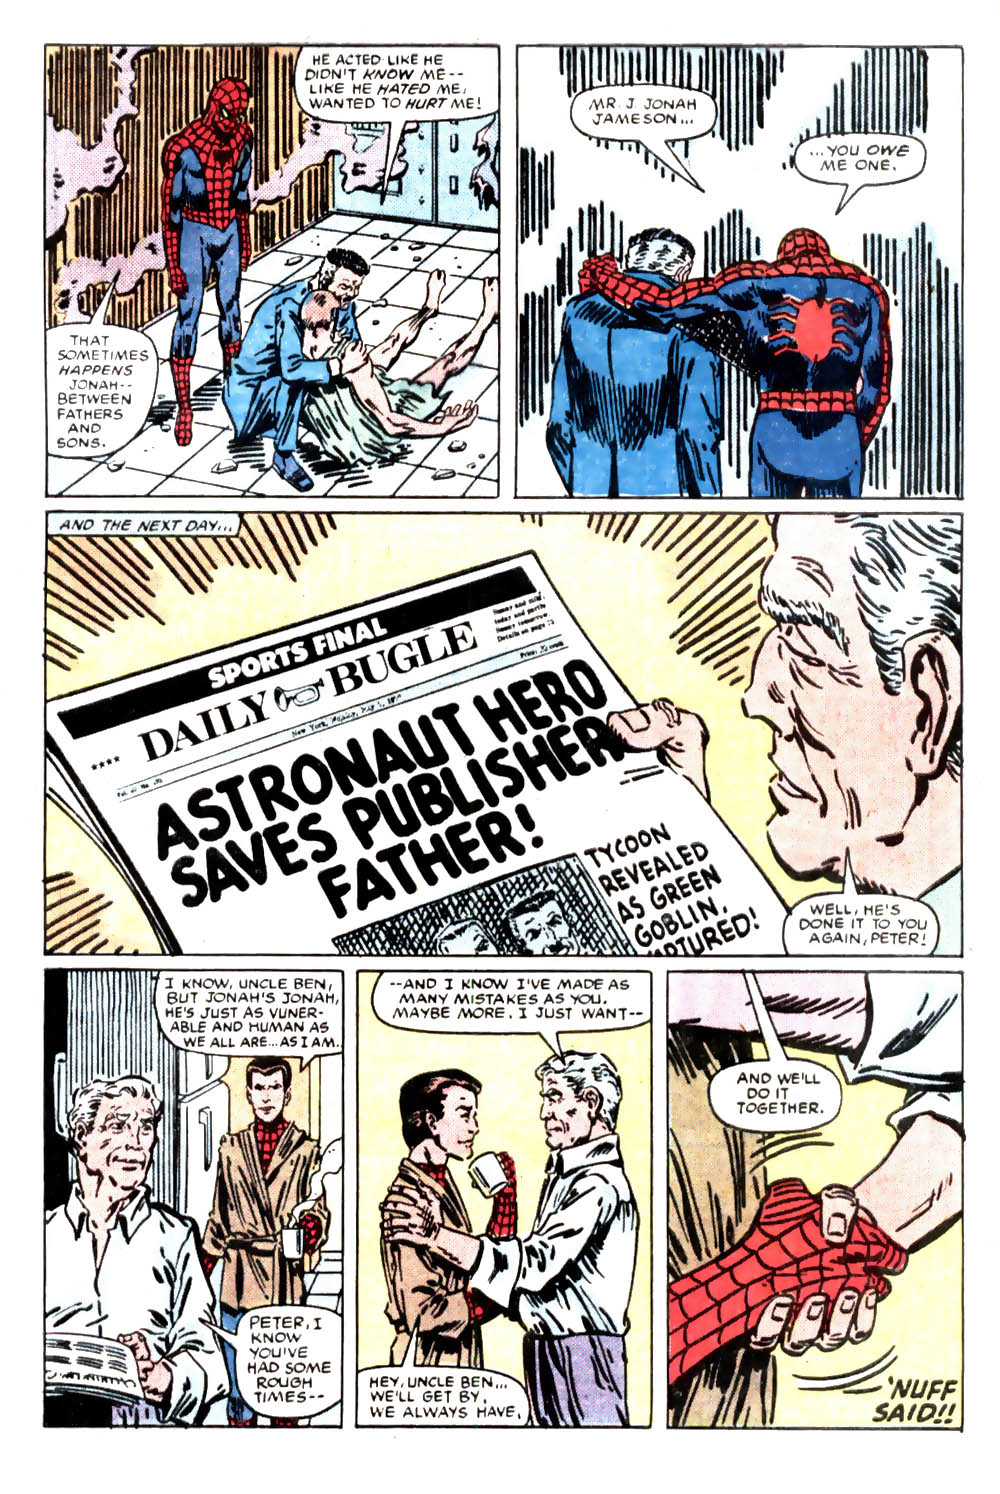 What If? (1977) issue 46 - Spiderman's uncle ben had lived - Page 40